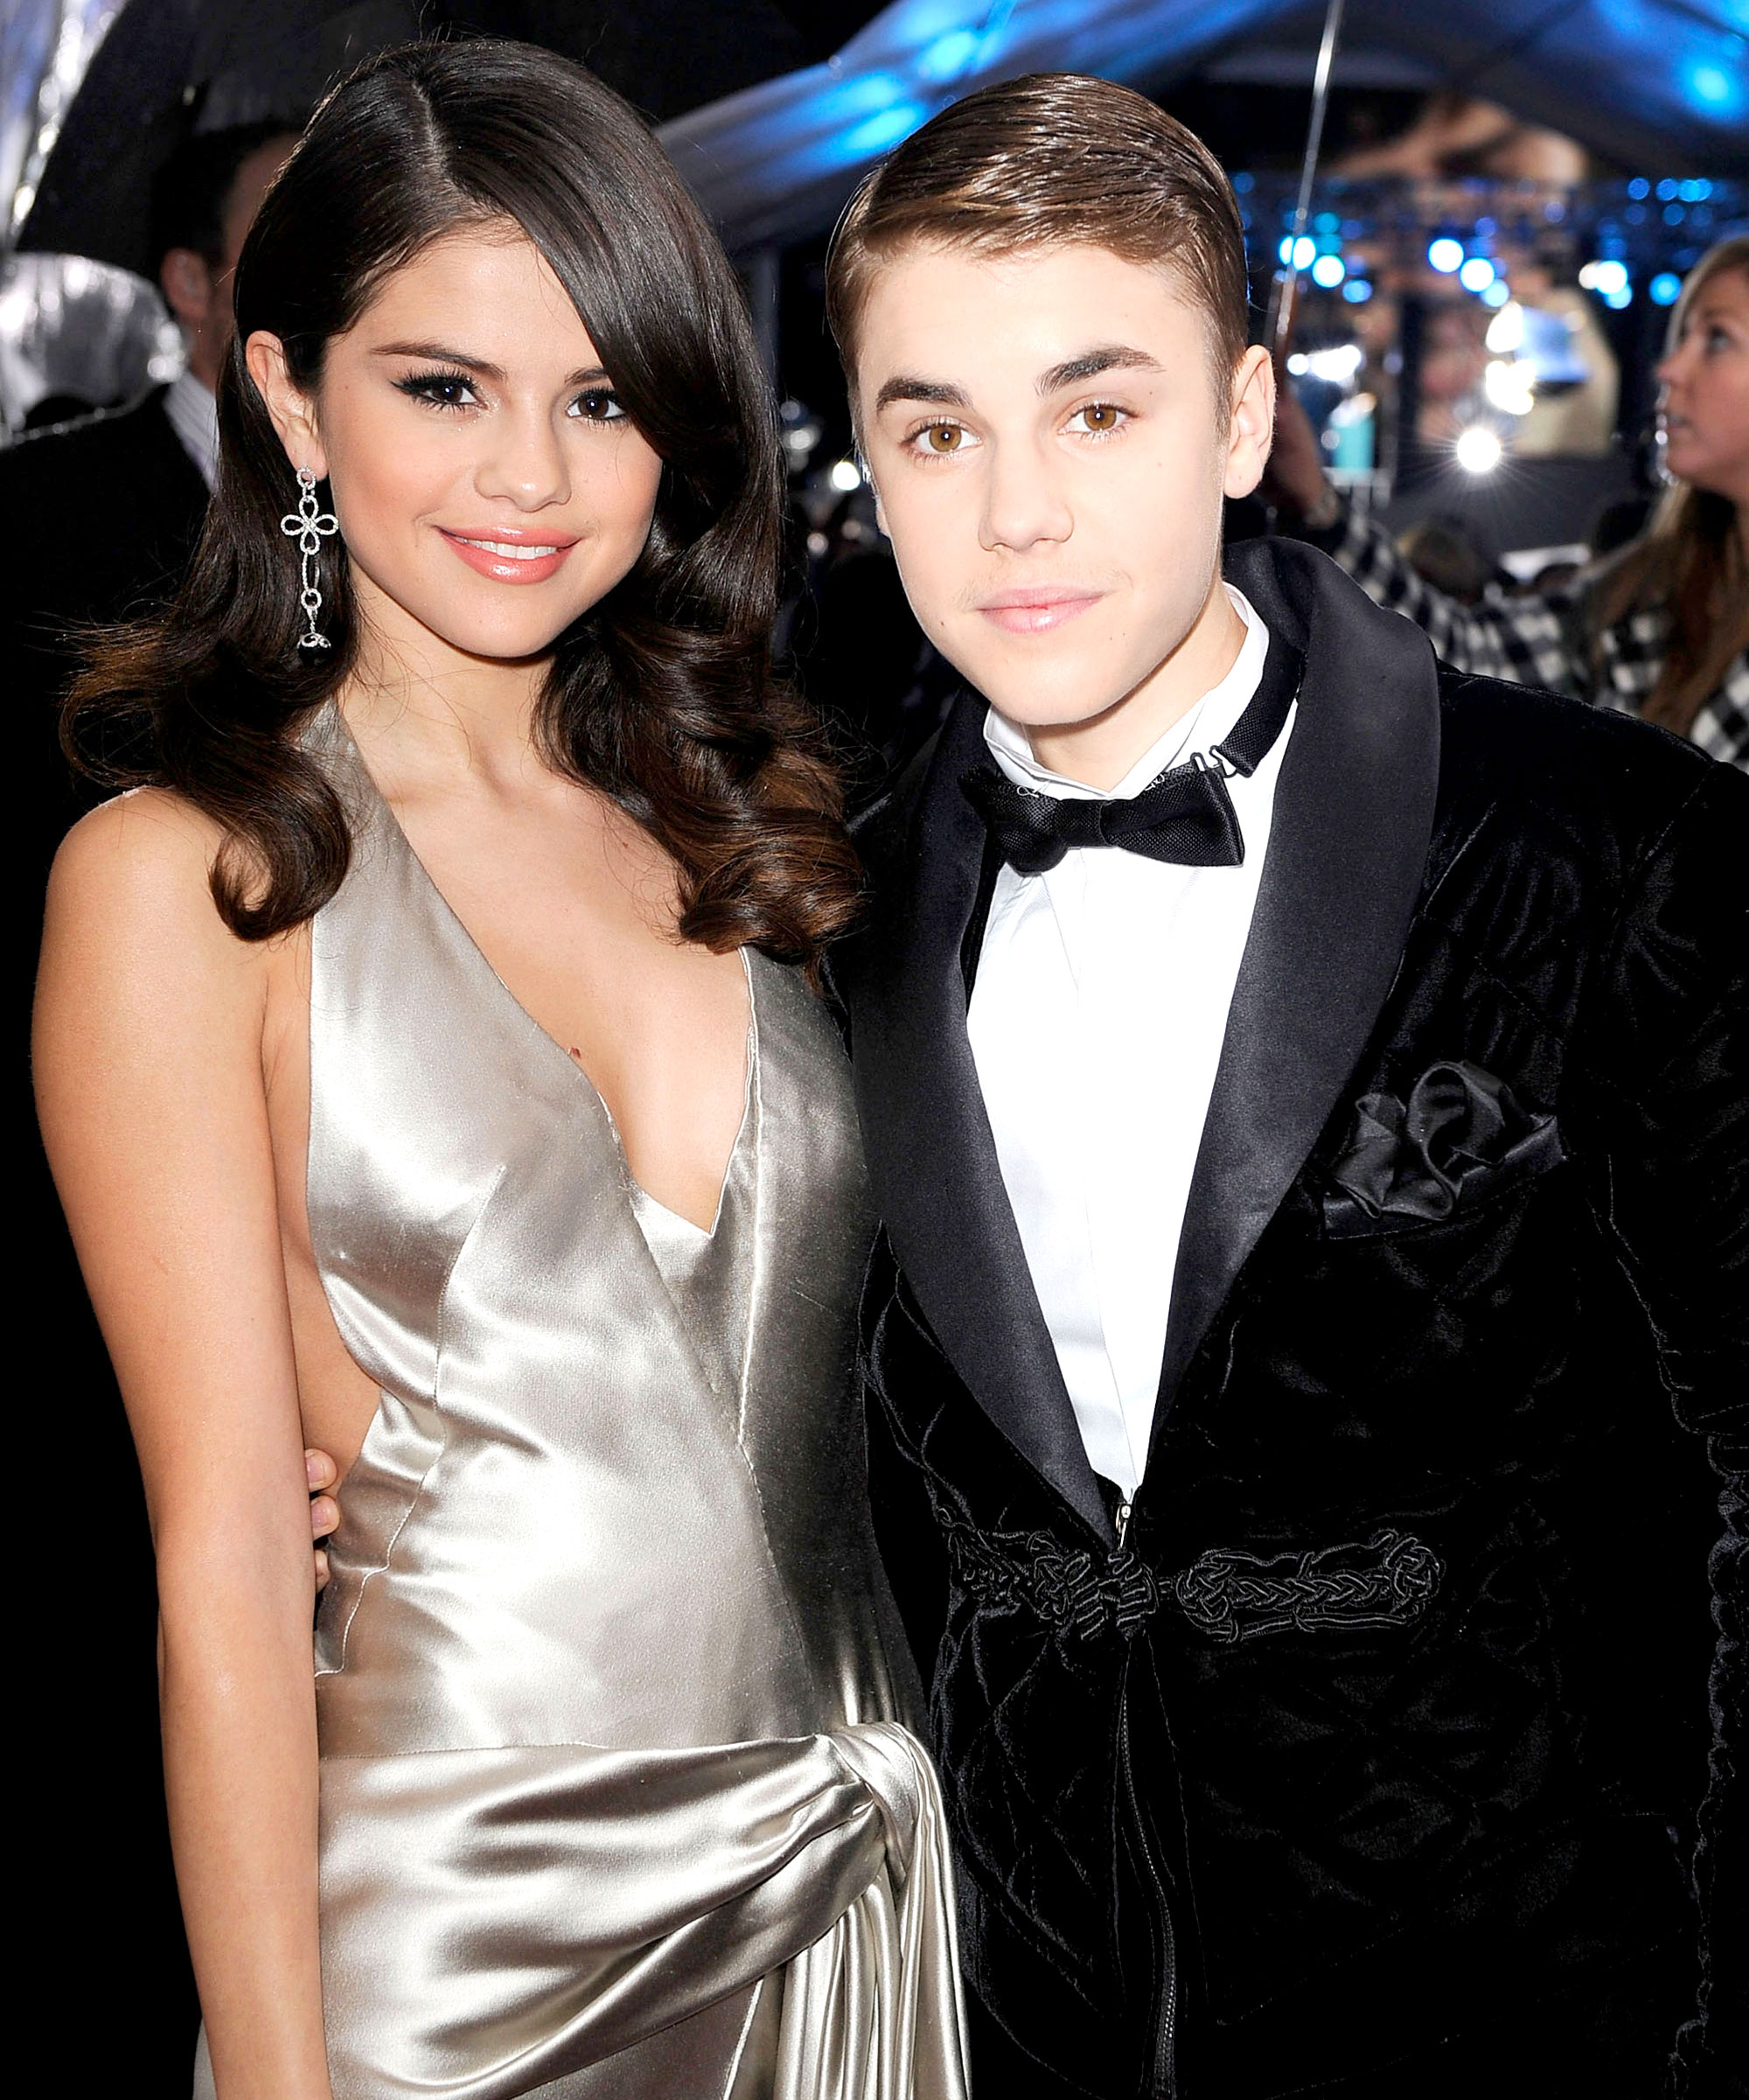 Bieber now is who dating who is